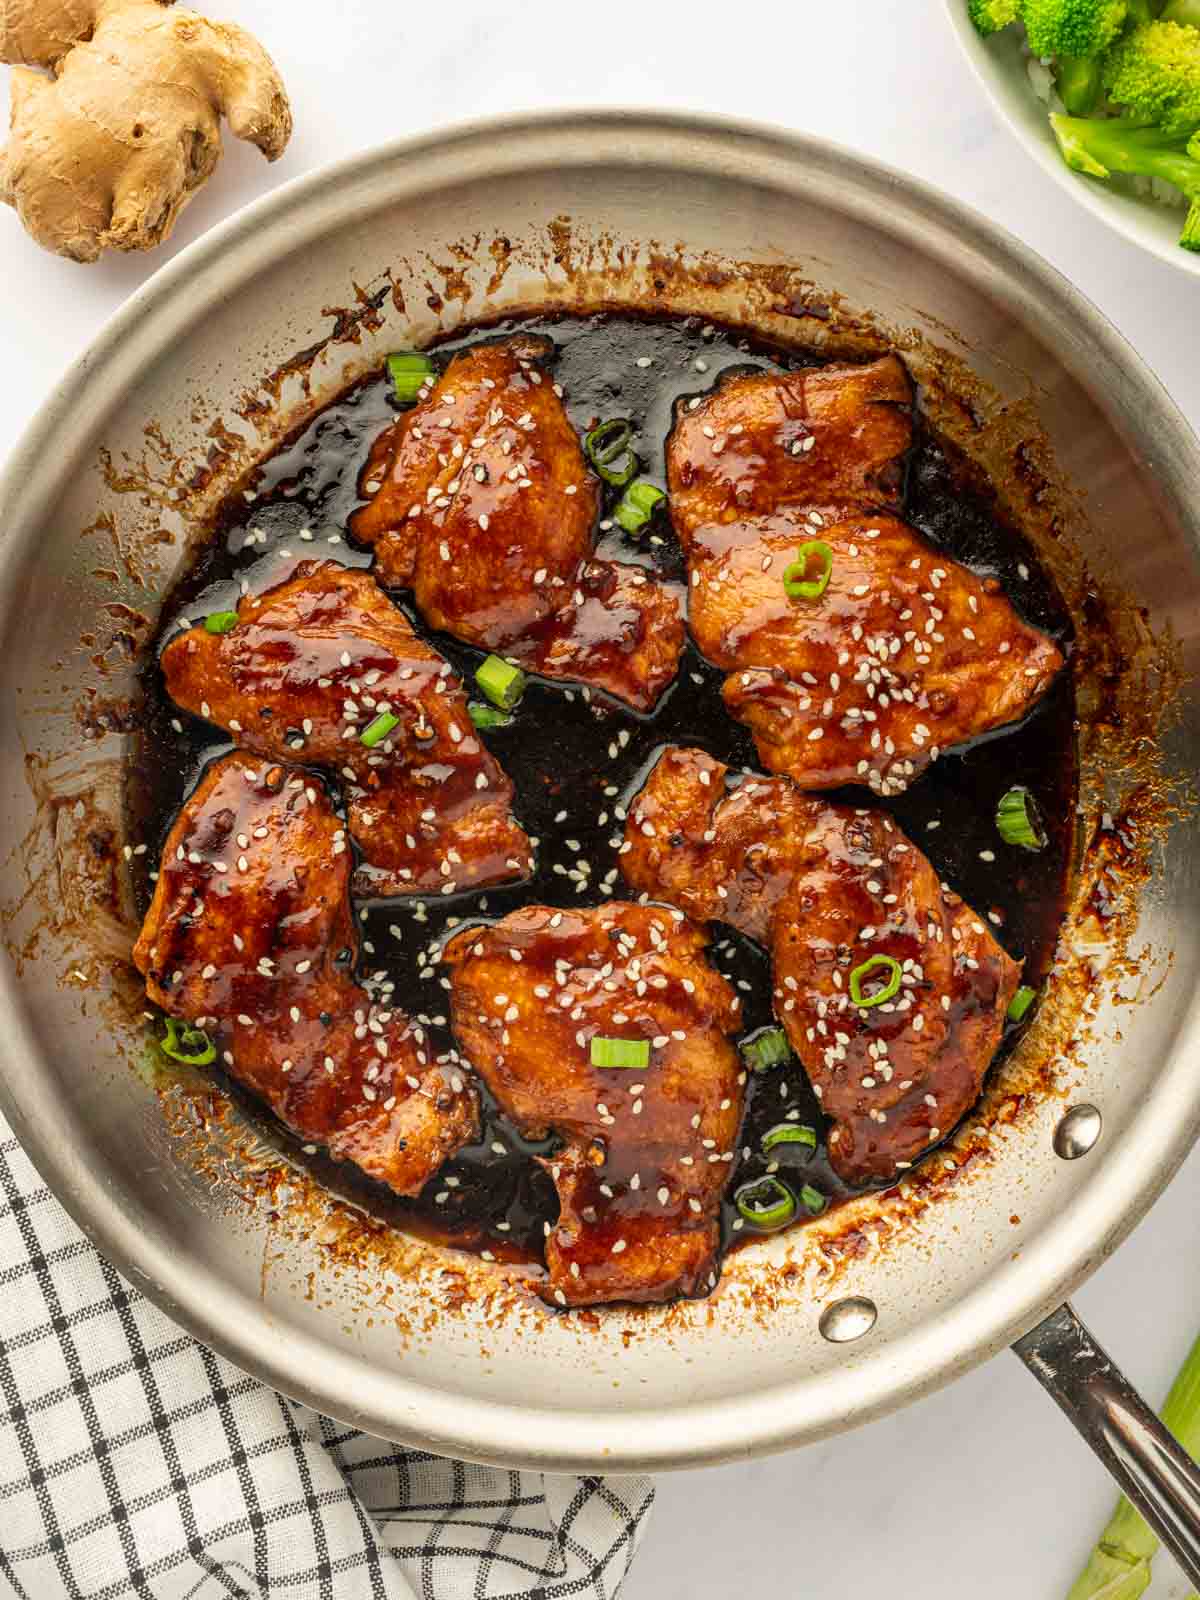 Teriyaki chicken garnished with green onions in a skillet.